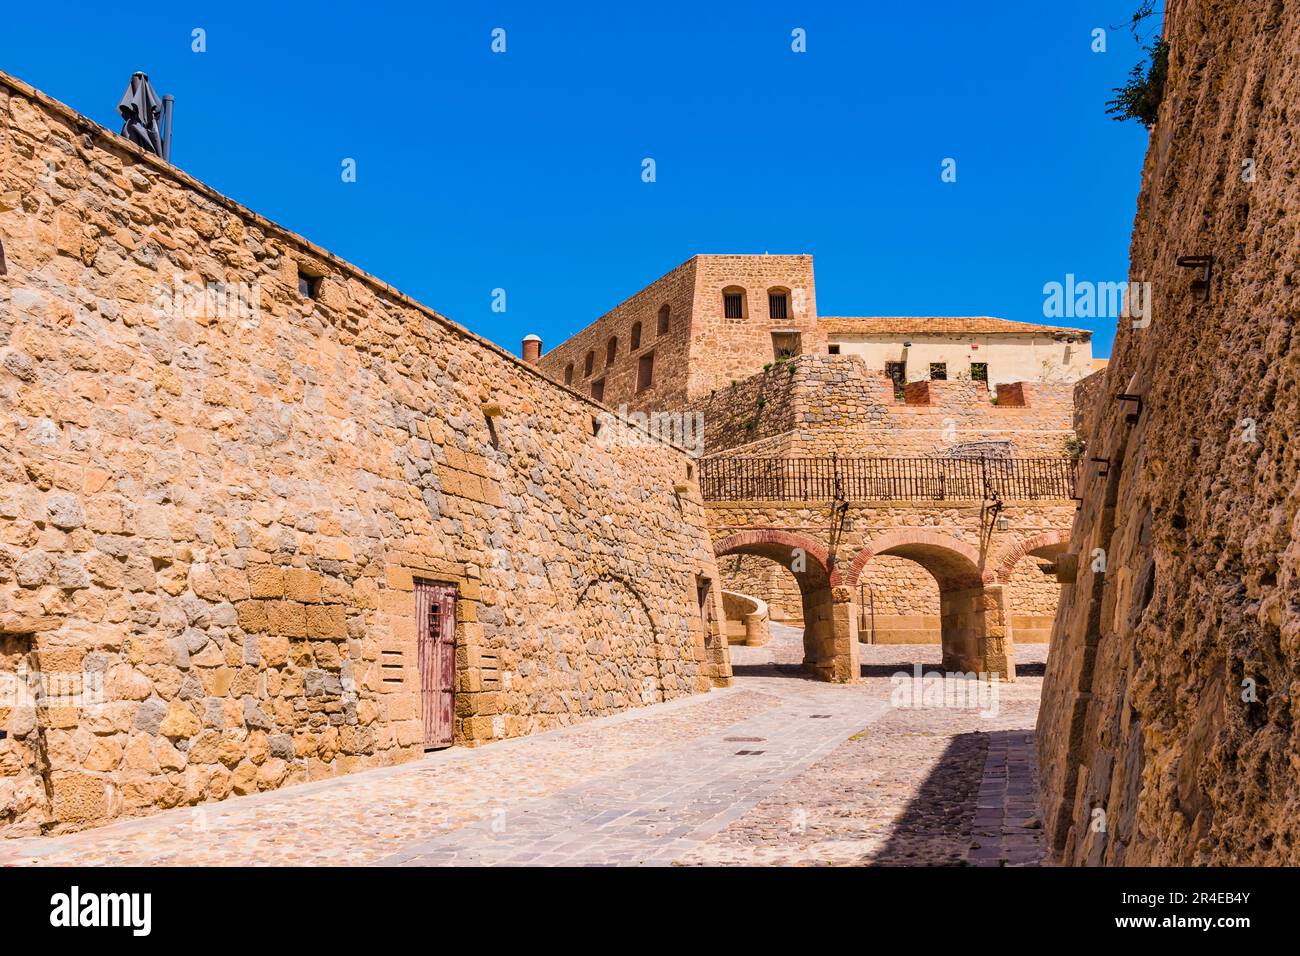 The Hornabeque Moat is one of the most outstanding places in the Spanish citadel of Melilla la Vieja, in Melilla. It is located at the western end of Stock Photo